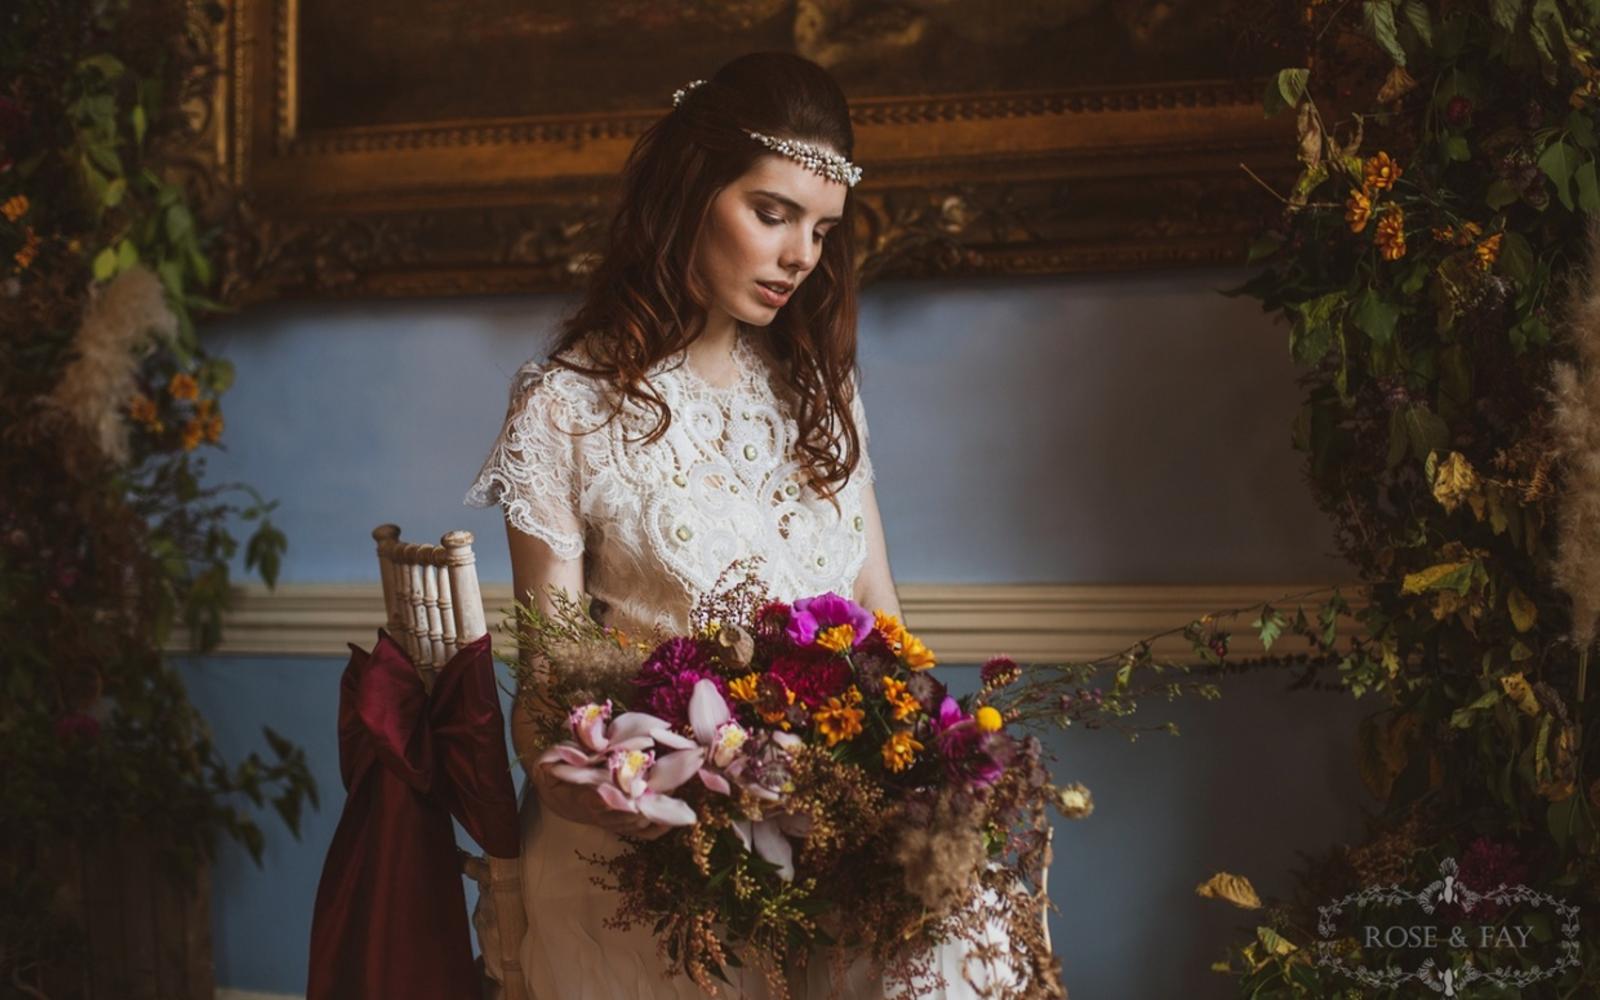 Styled Shot Avante Garde wedding venue Devizes Town Hall Whitewed Willoughby & Wolf Hibiscus & Hodge Pastel Designs classical whimsical autumnal rich bridal ideas burgundy pink yellow boho